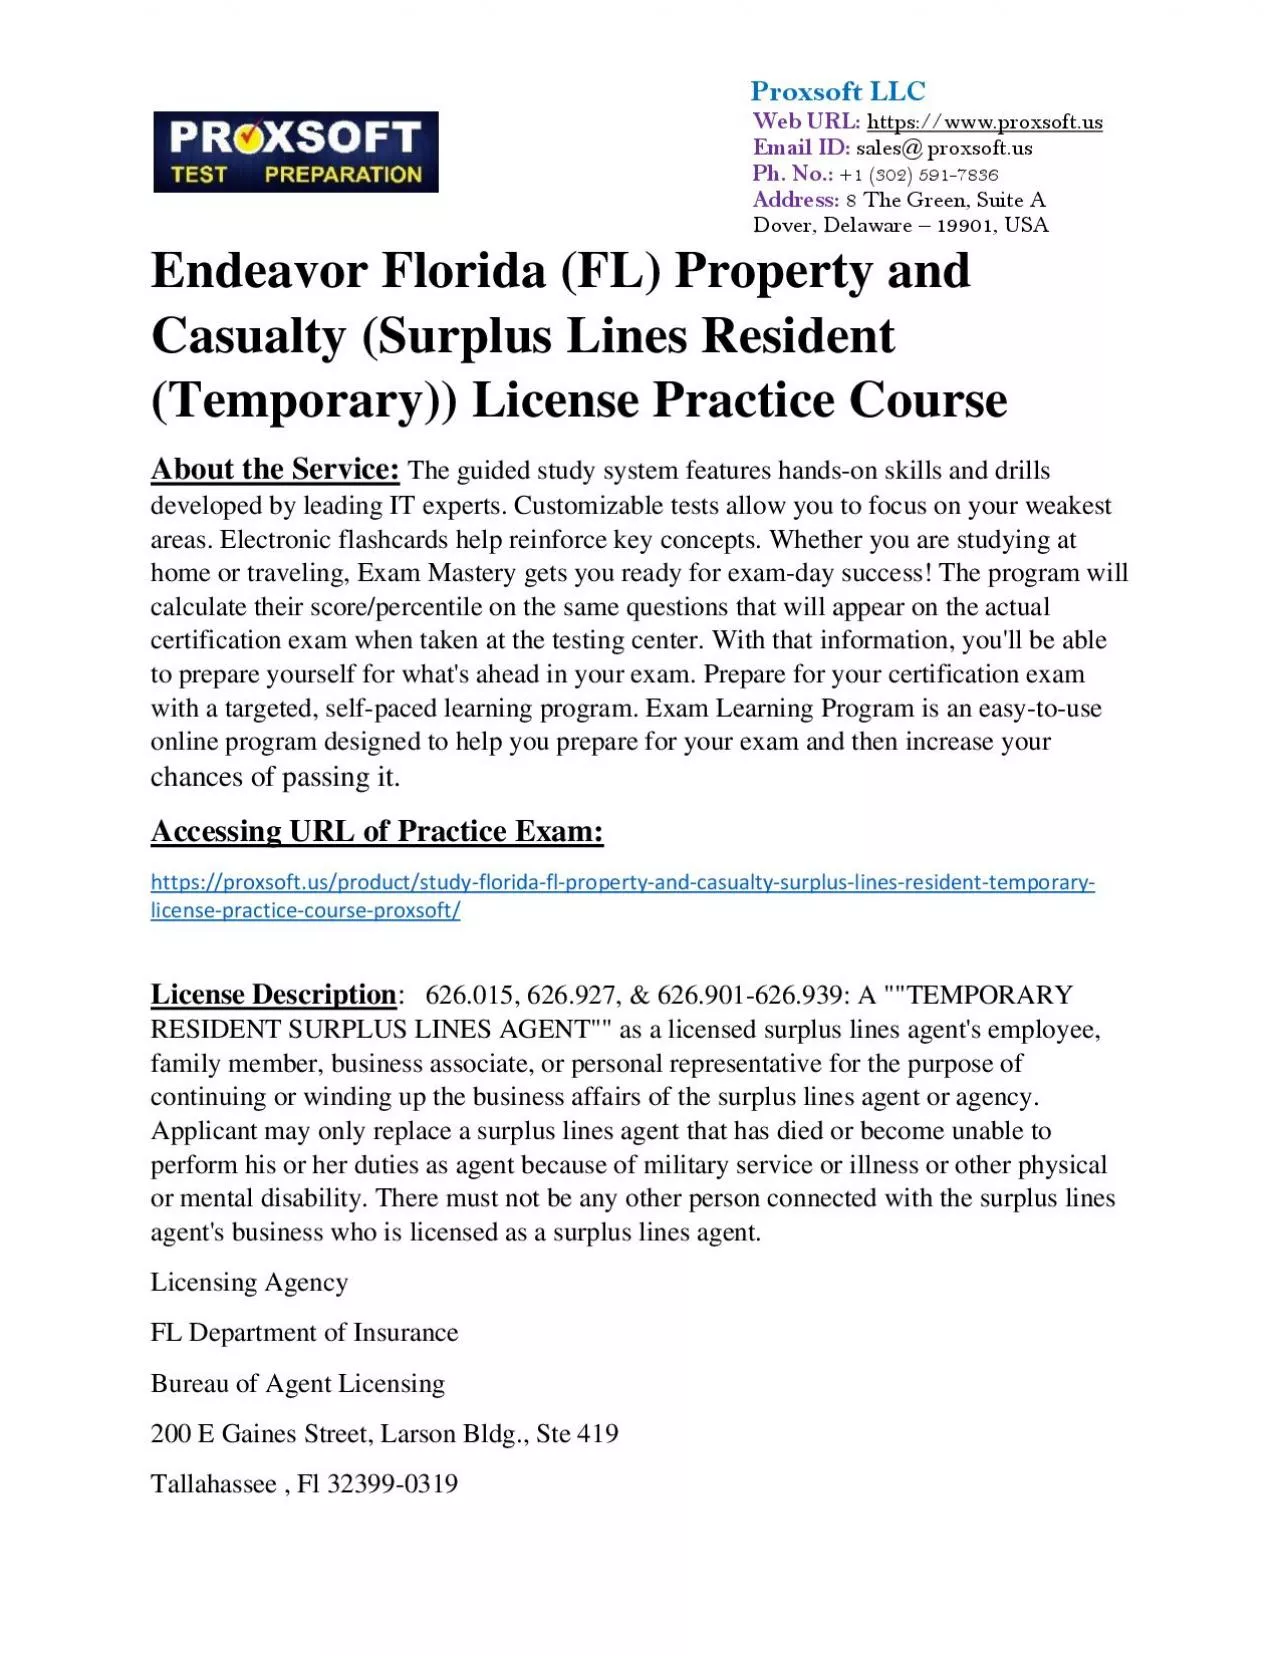 Endeavor Florida (FL) Property and Casualty (Surplus Lines Resident (Temporary)) License